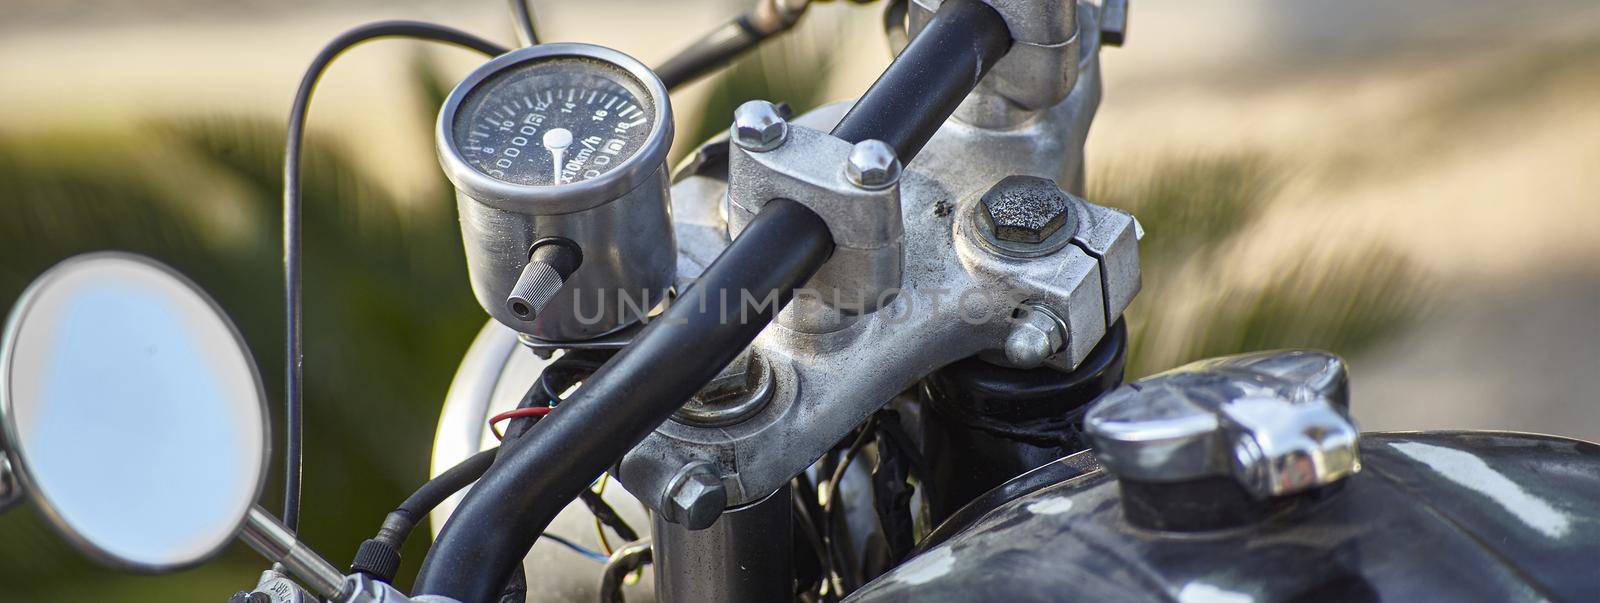 Vintage motorbike detail, banner image with copy space